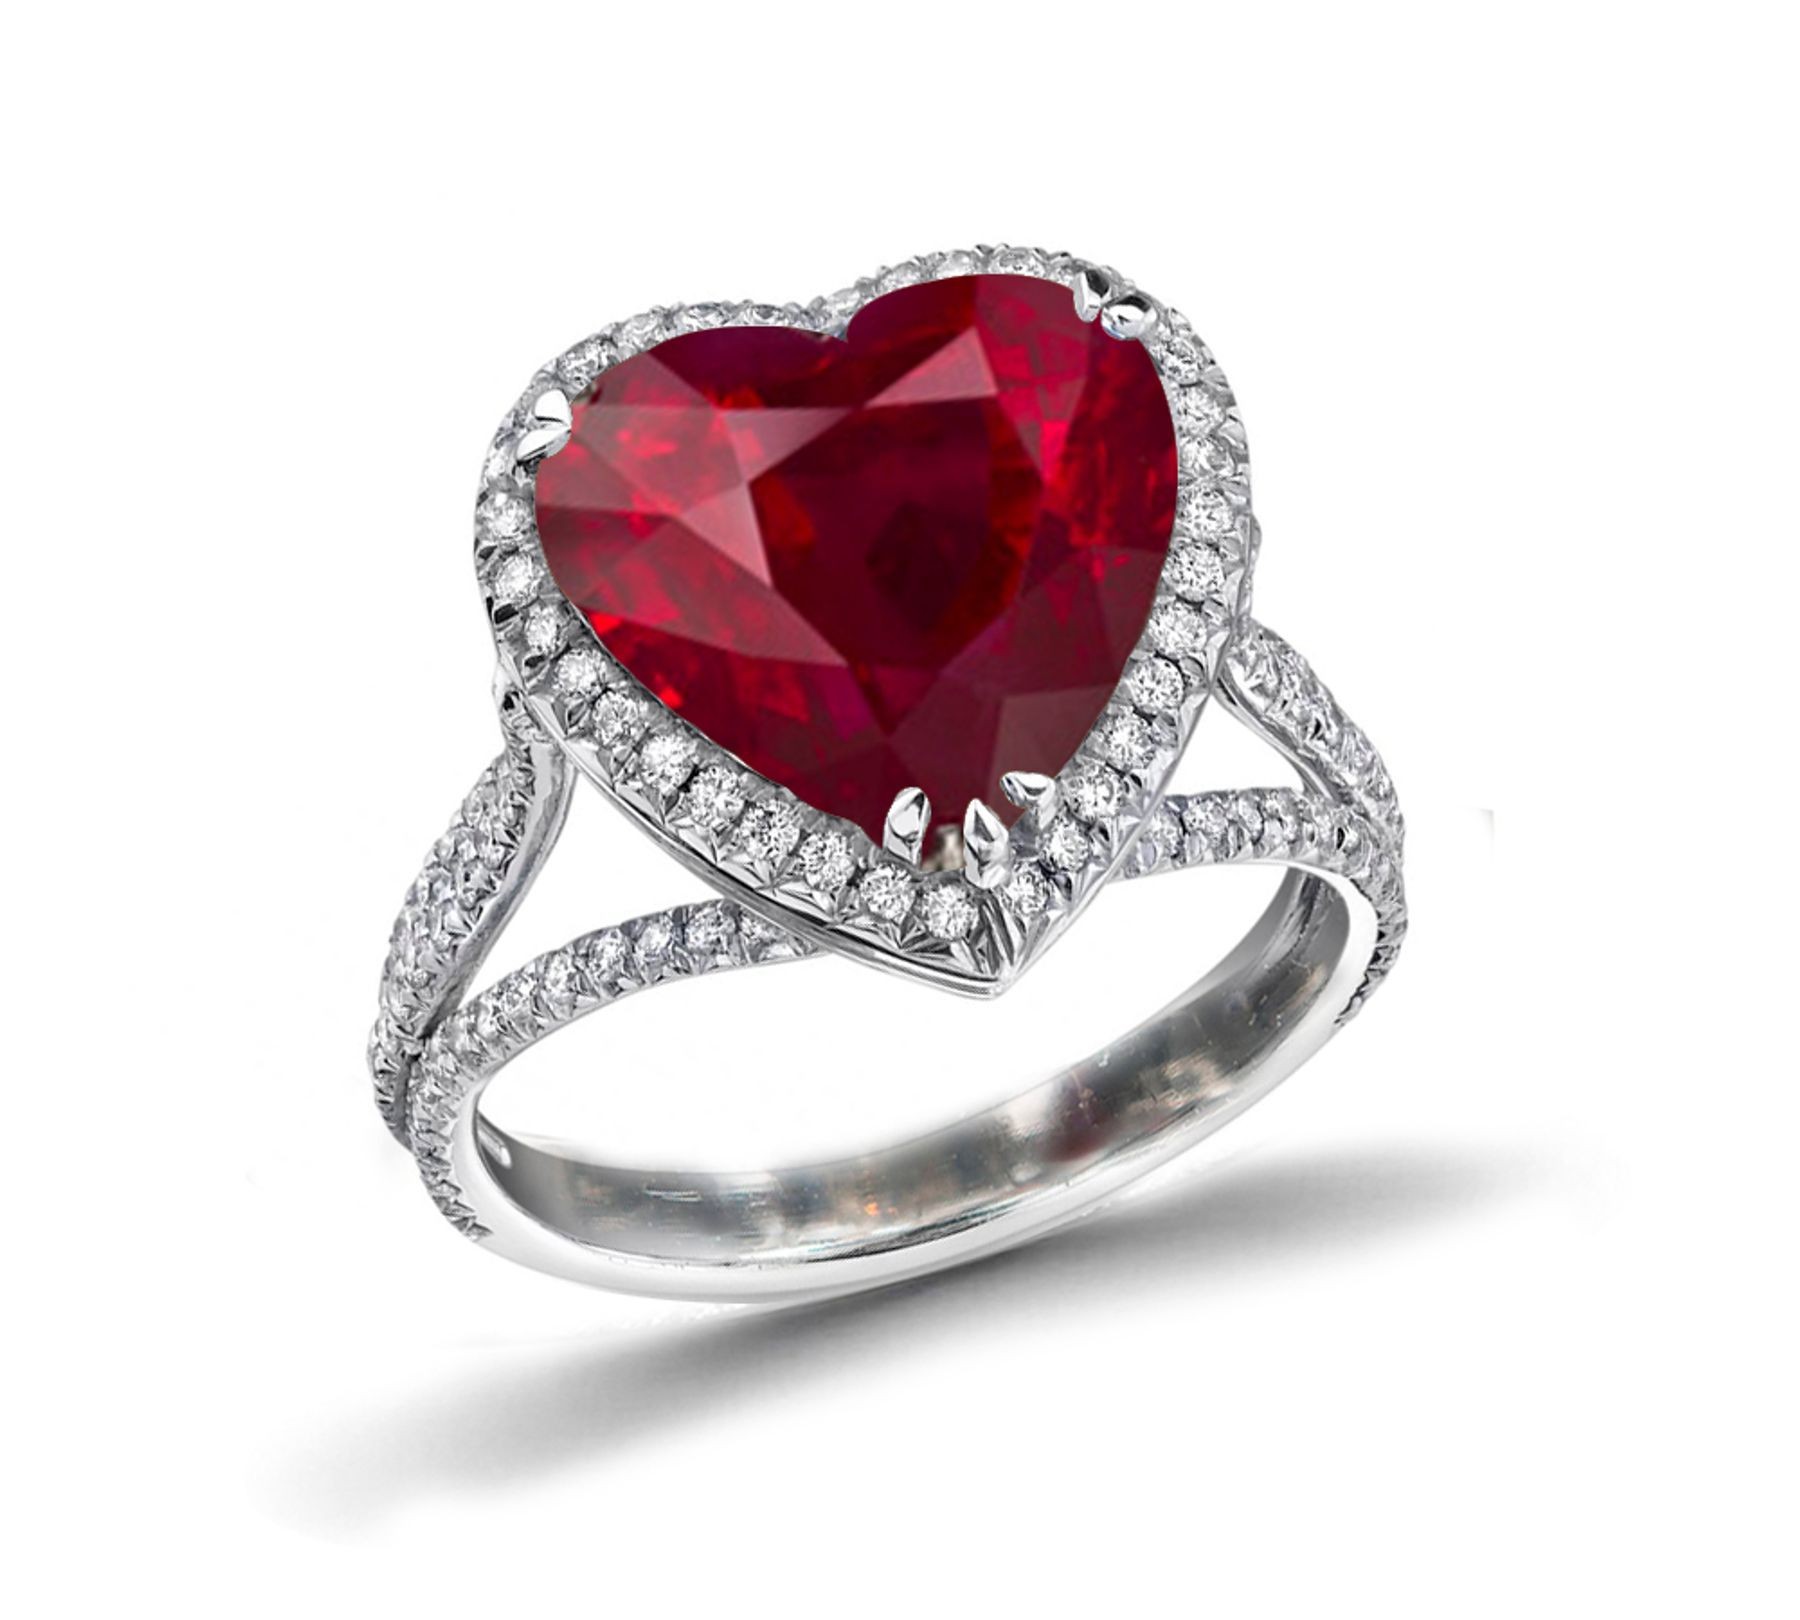 Ring with Heart Ruby & Pave Set Rubies & White Diamonds in Gold or Platinum